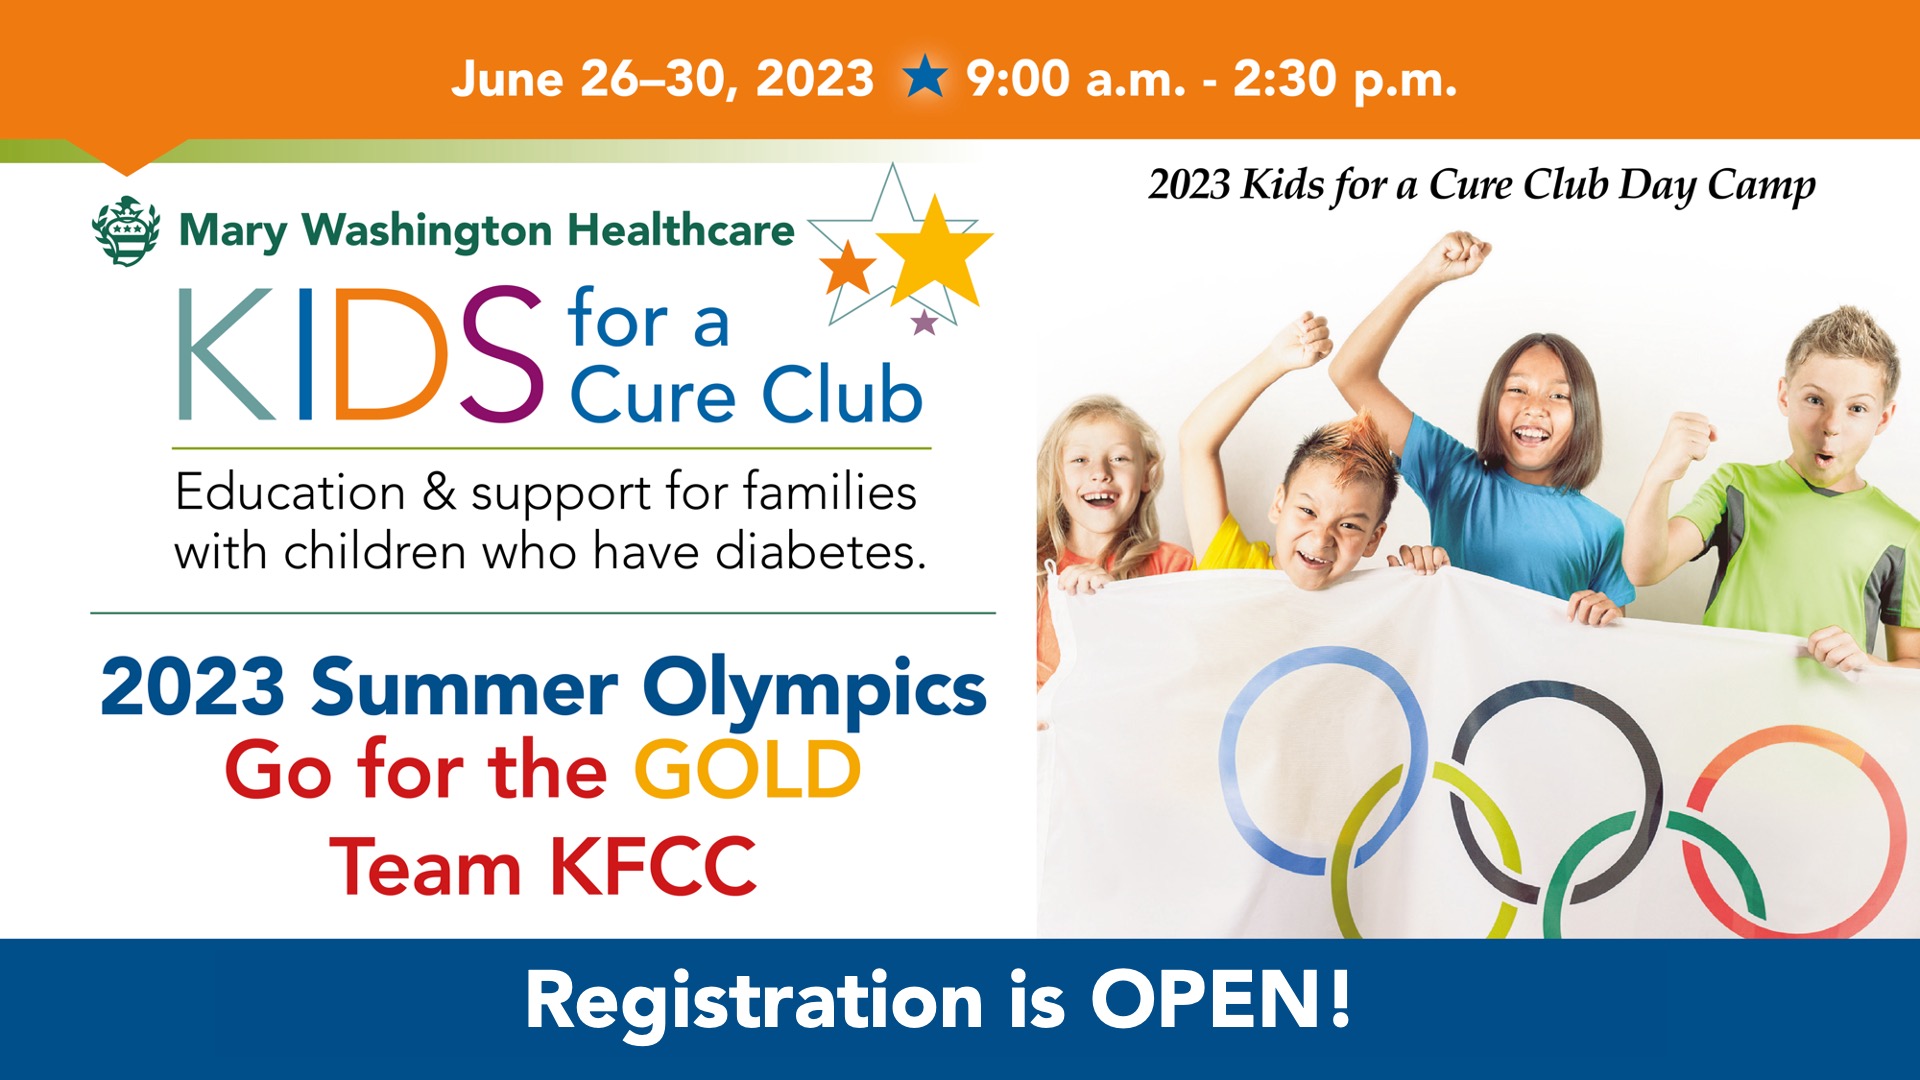 Kids for a Cure Camp registration is open